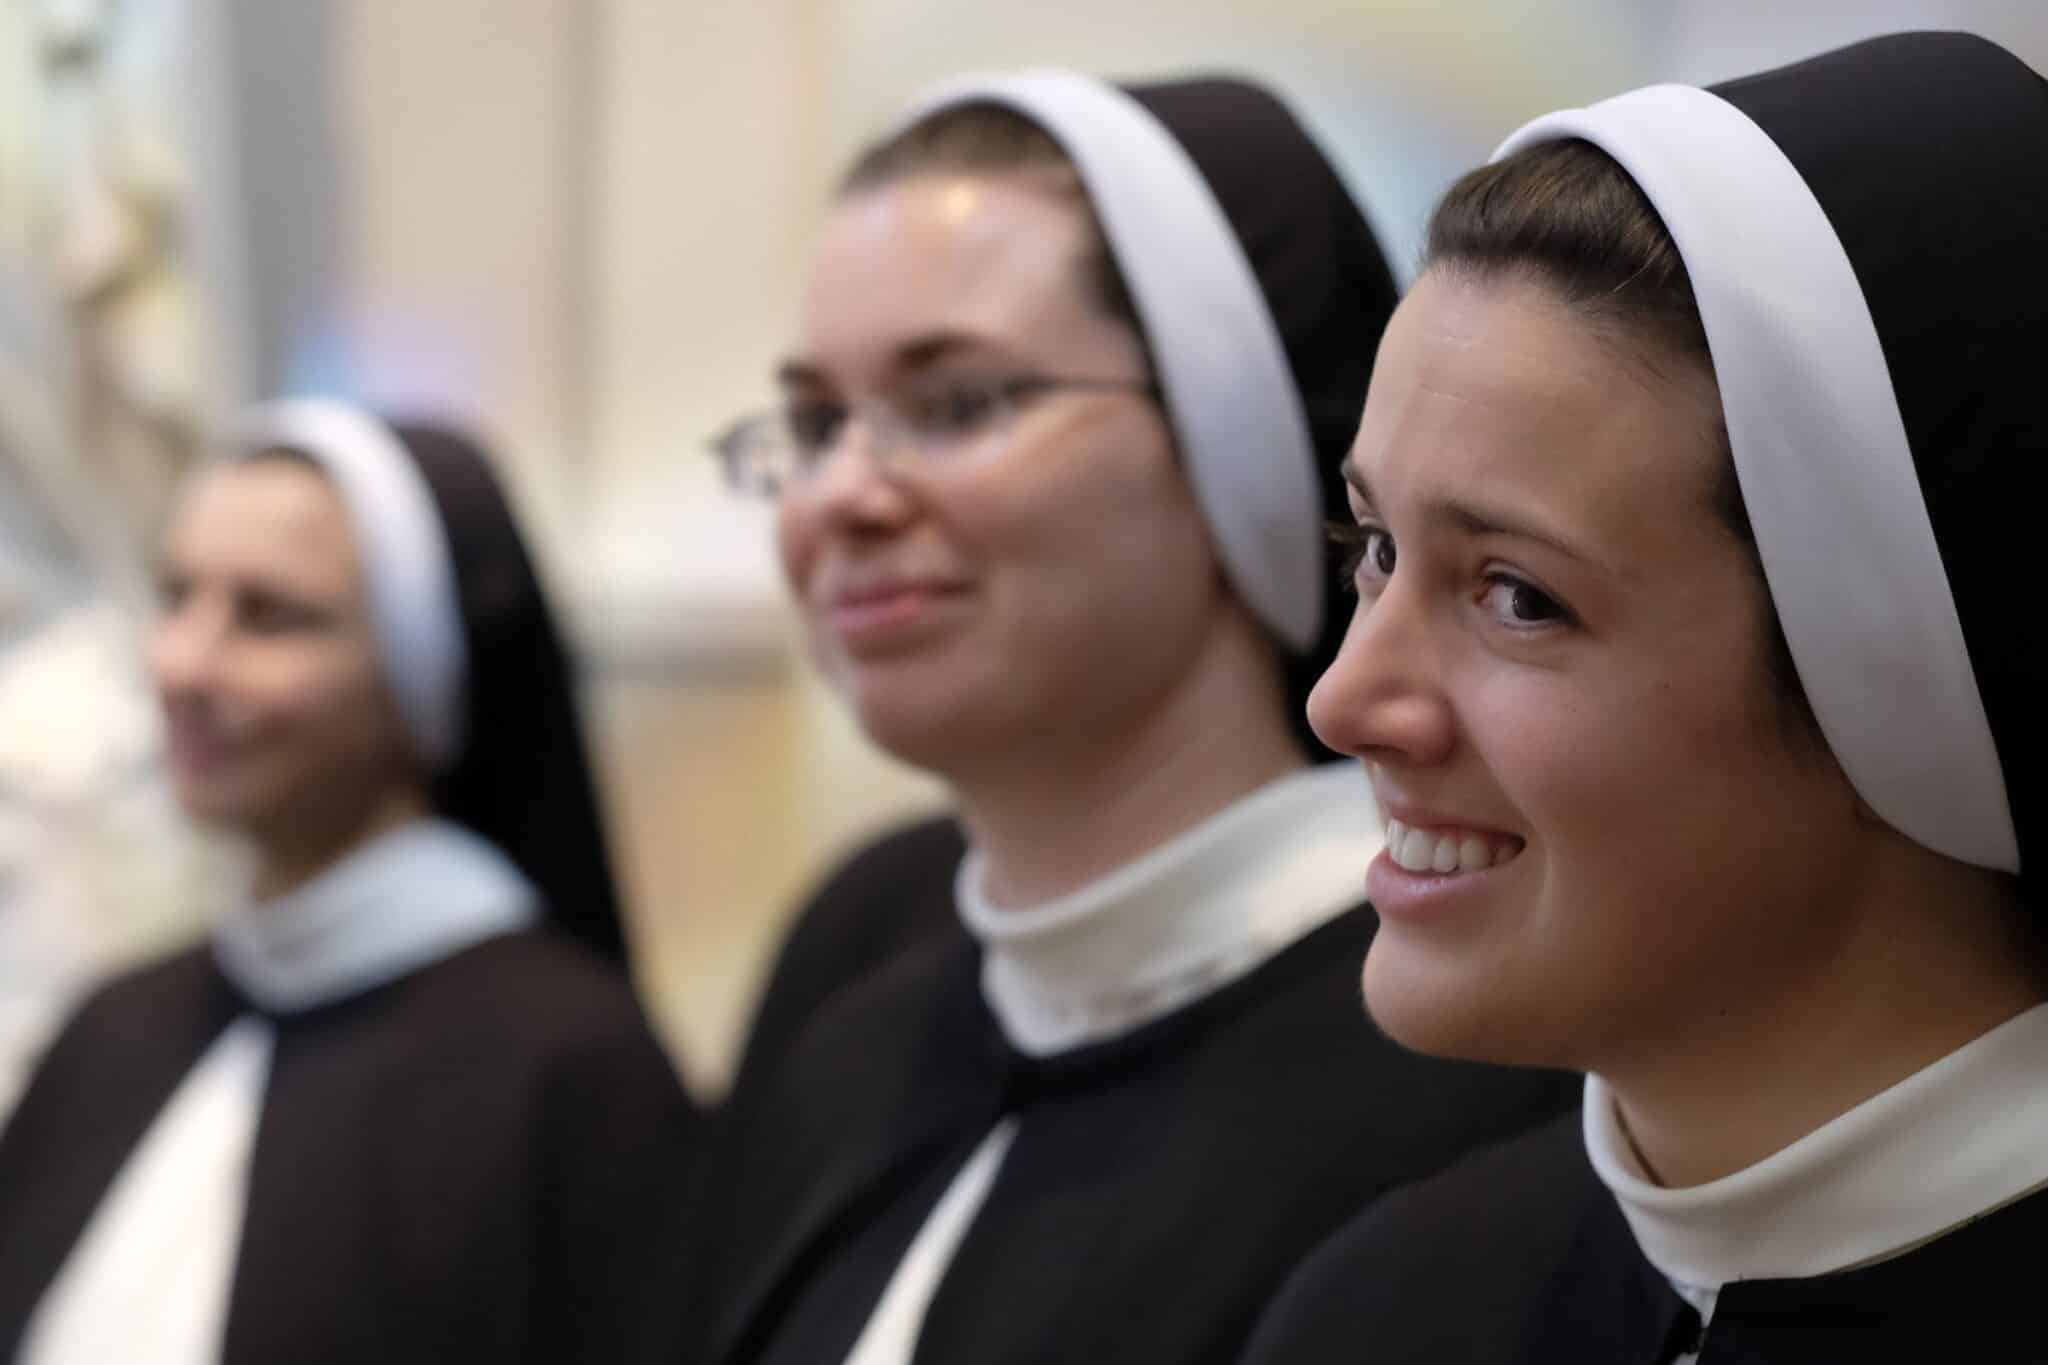 Members of the Dominican Sisters of St. Cecilia Congregation in Nashville, Tenn., are pictured in a file photo preparing for Mass at the Cathedral of the Incarnation, where they made their final profession of religious vows. (OSV News photo/CNS file, Rick Musacchio, Tennessee Register)